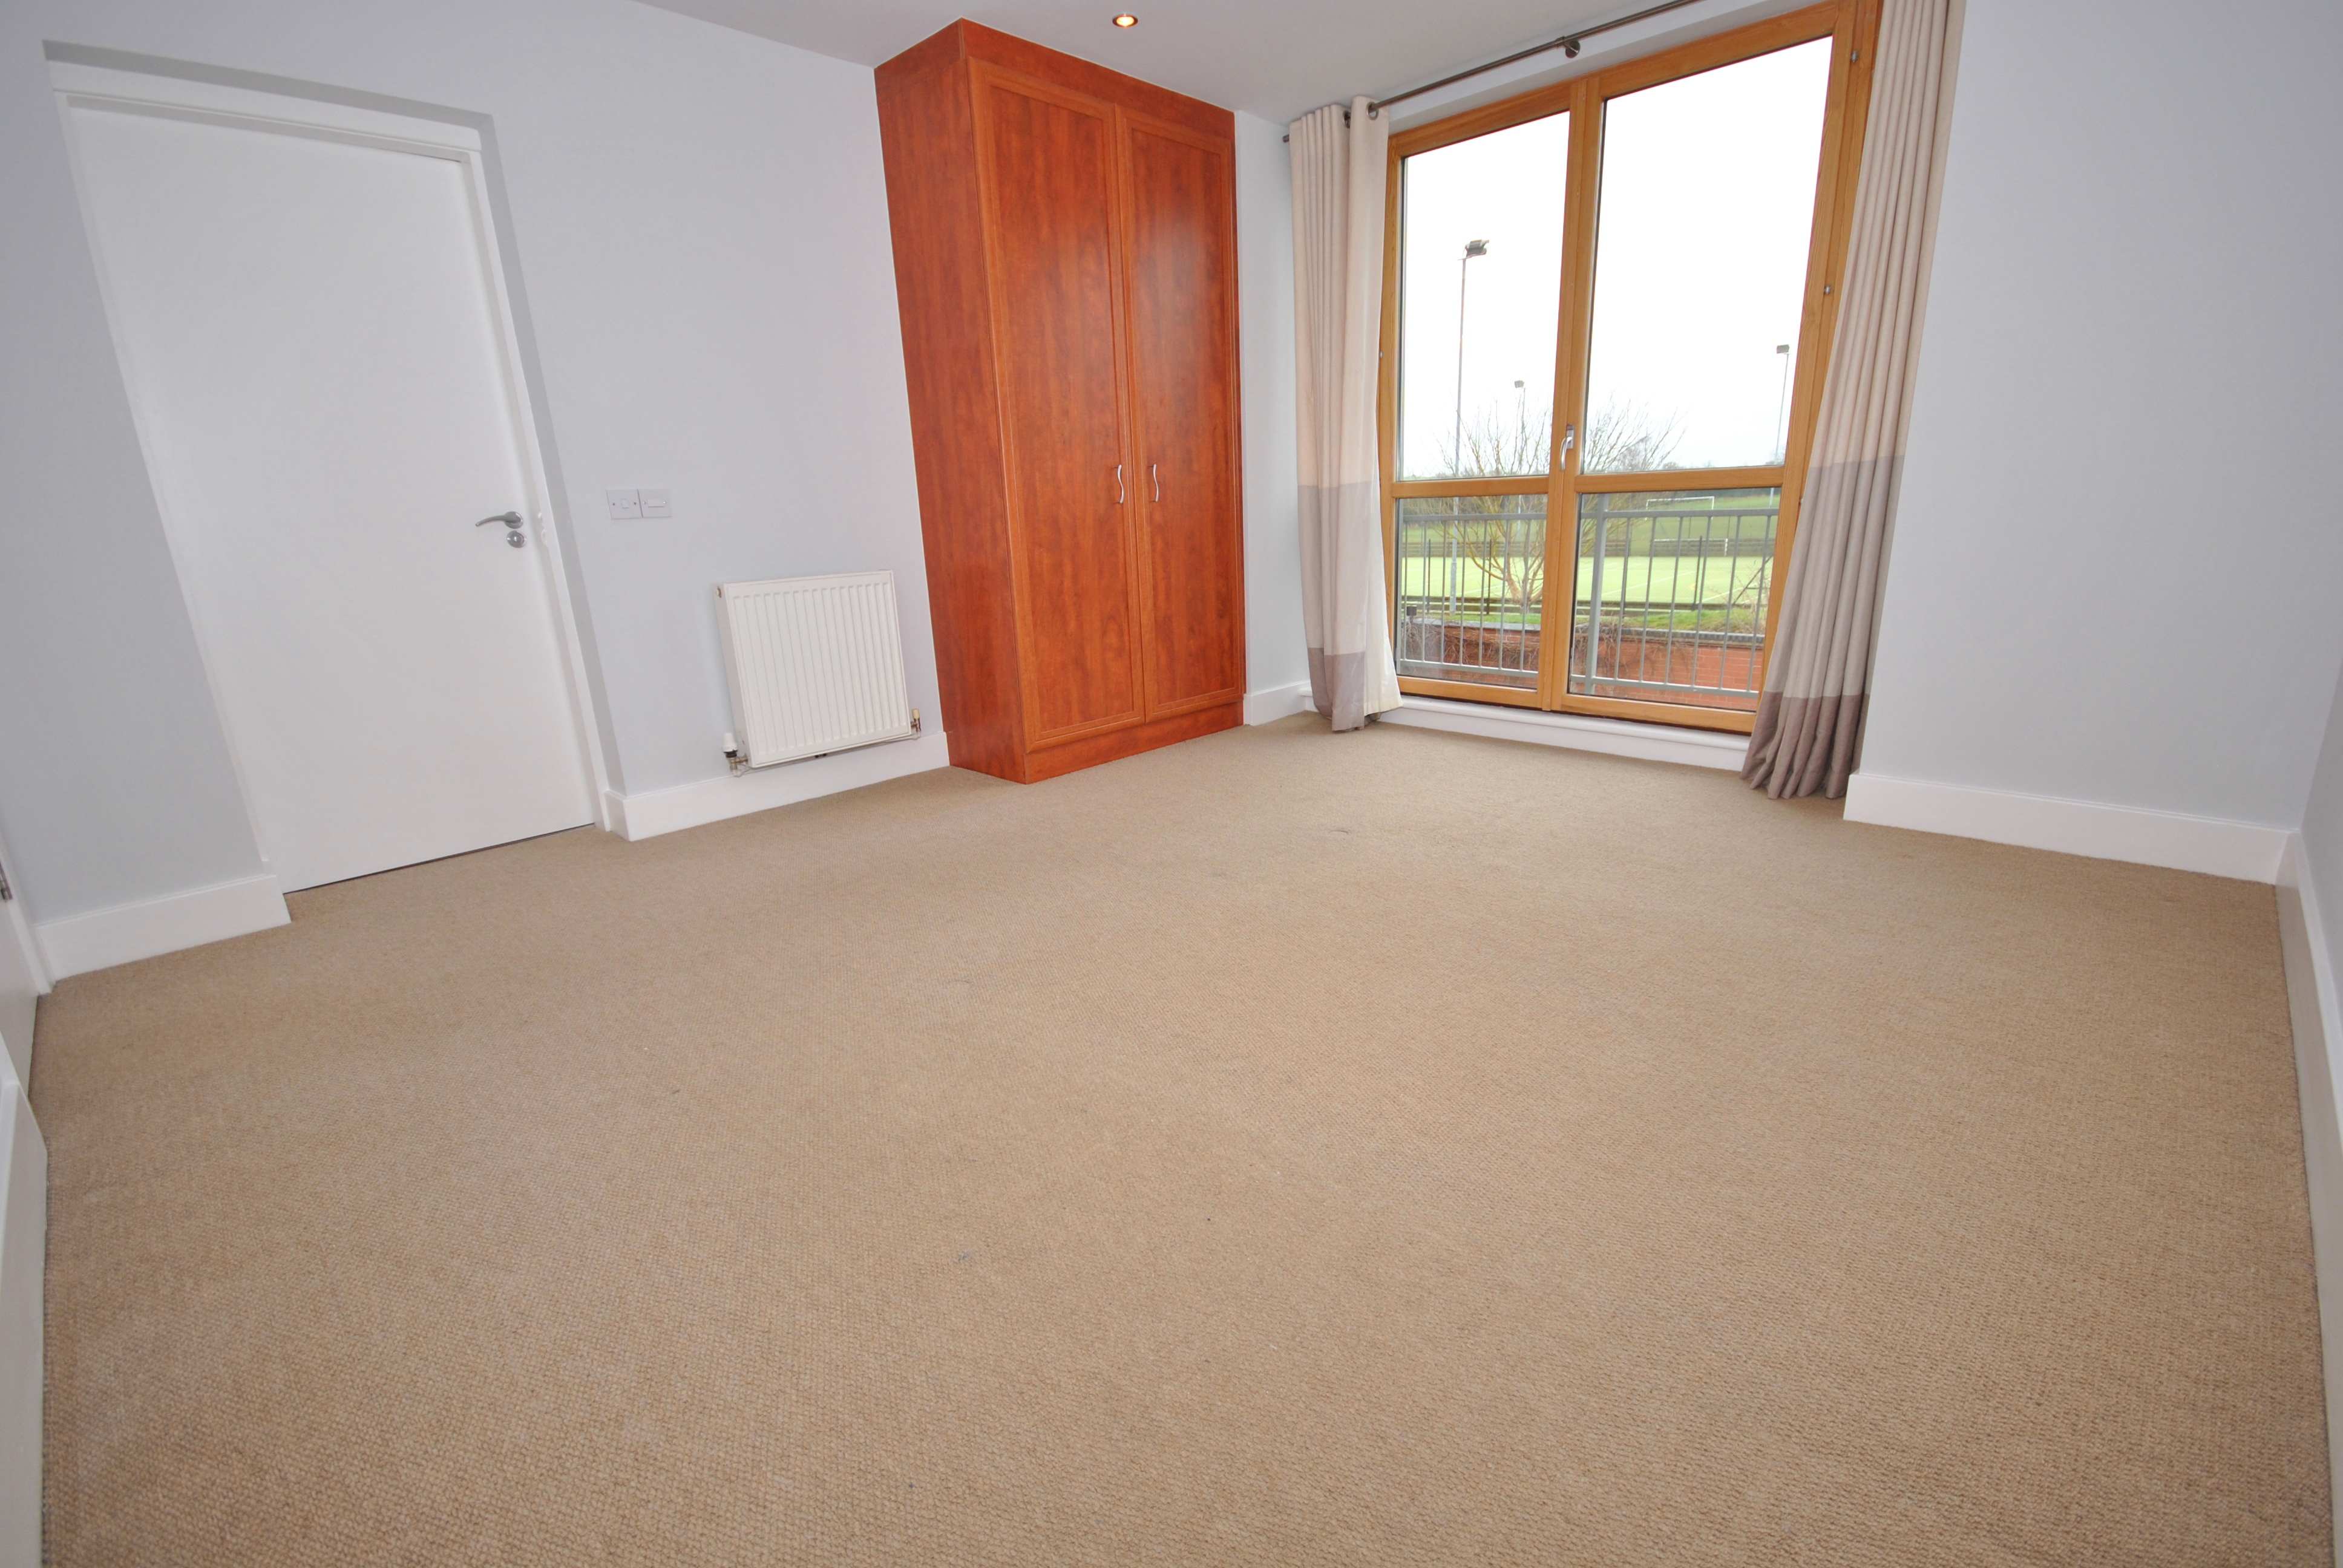 4 bed house to rent in Bingham Road, Radcliffe on Trent  - Property Image 6